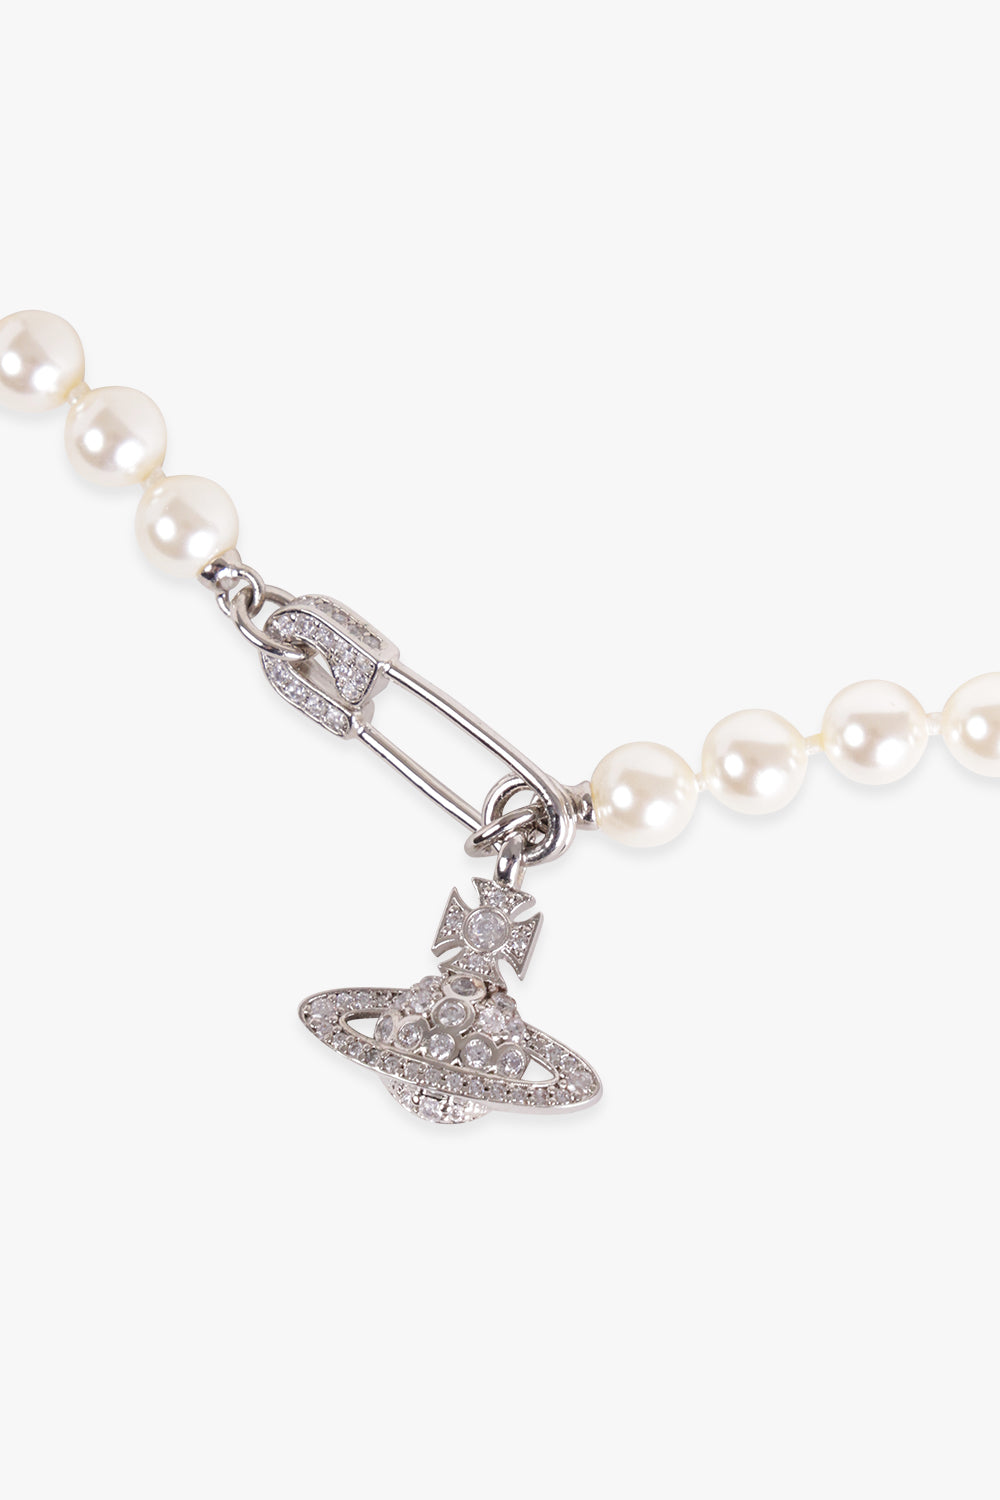 VIVIENNE WESTWOOD ACCESSORIES Silver Lucrece Pearl Necklace | Silver/Light Cream Rose/White